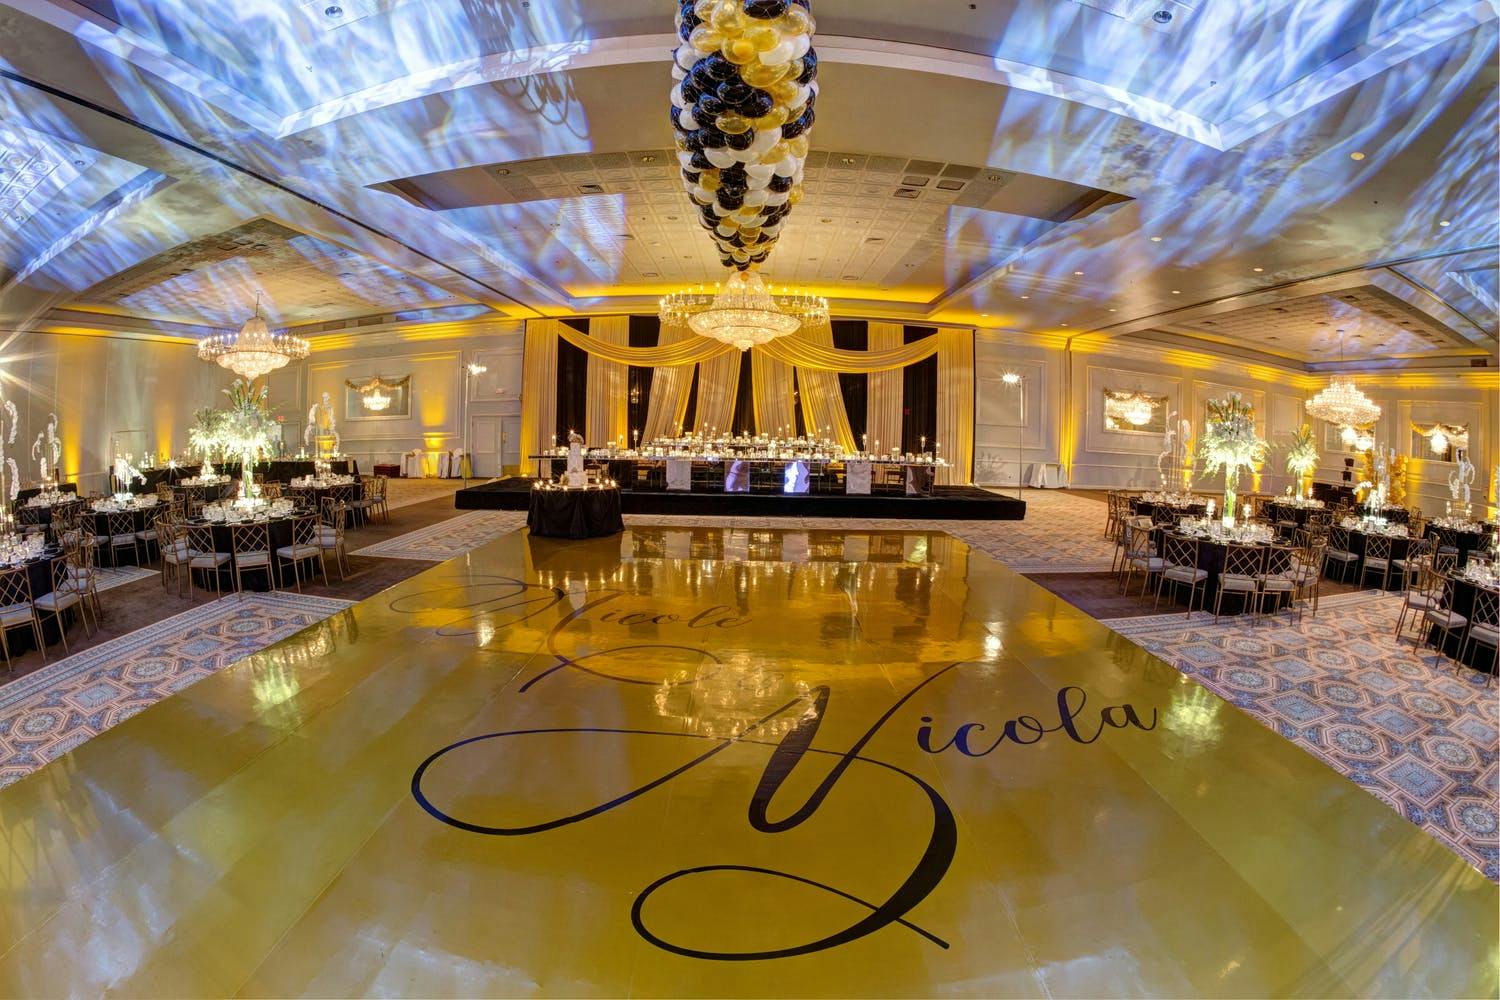 New Years Eve Wedding With Gold Dance Floor and Iridescent Ceiling Lighting Installation | PartySlate